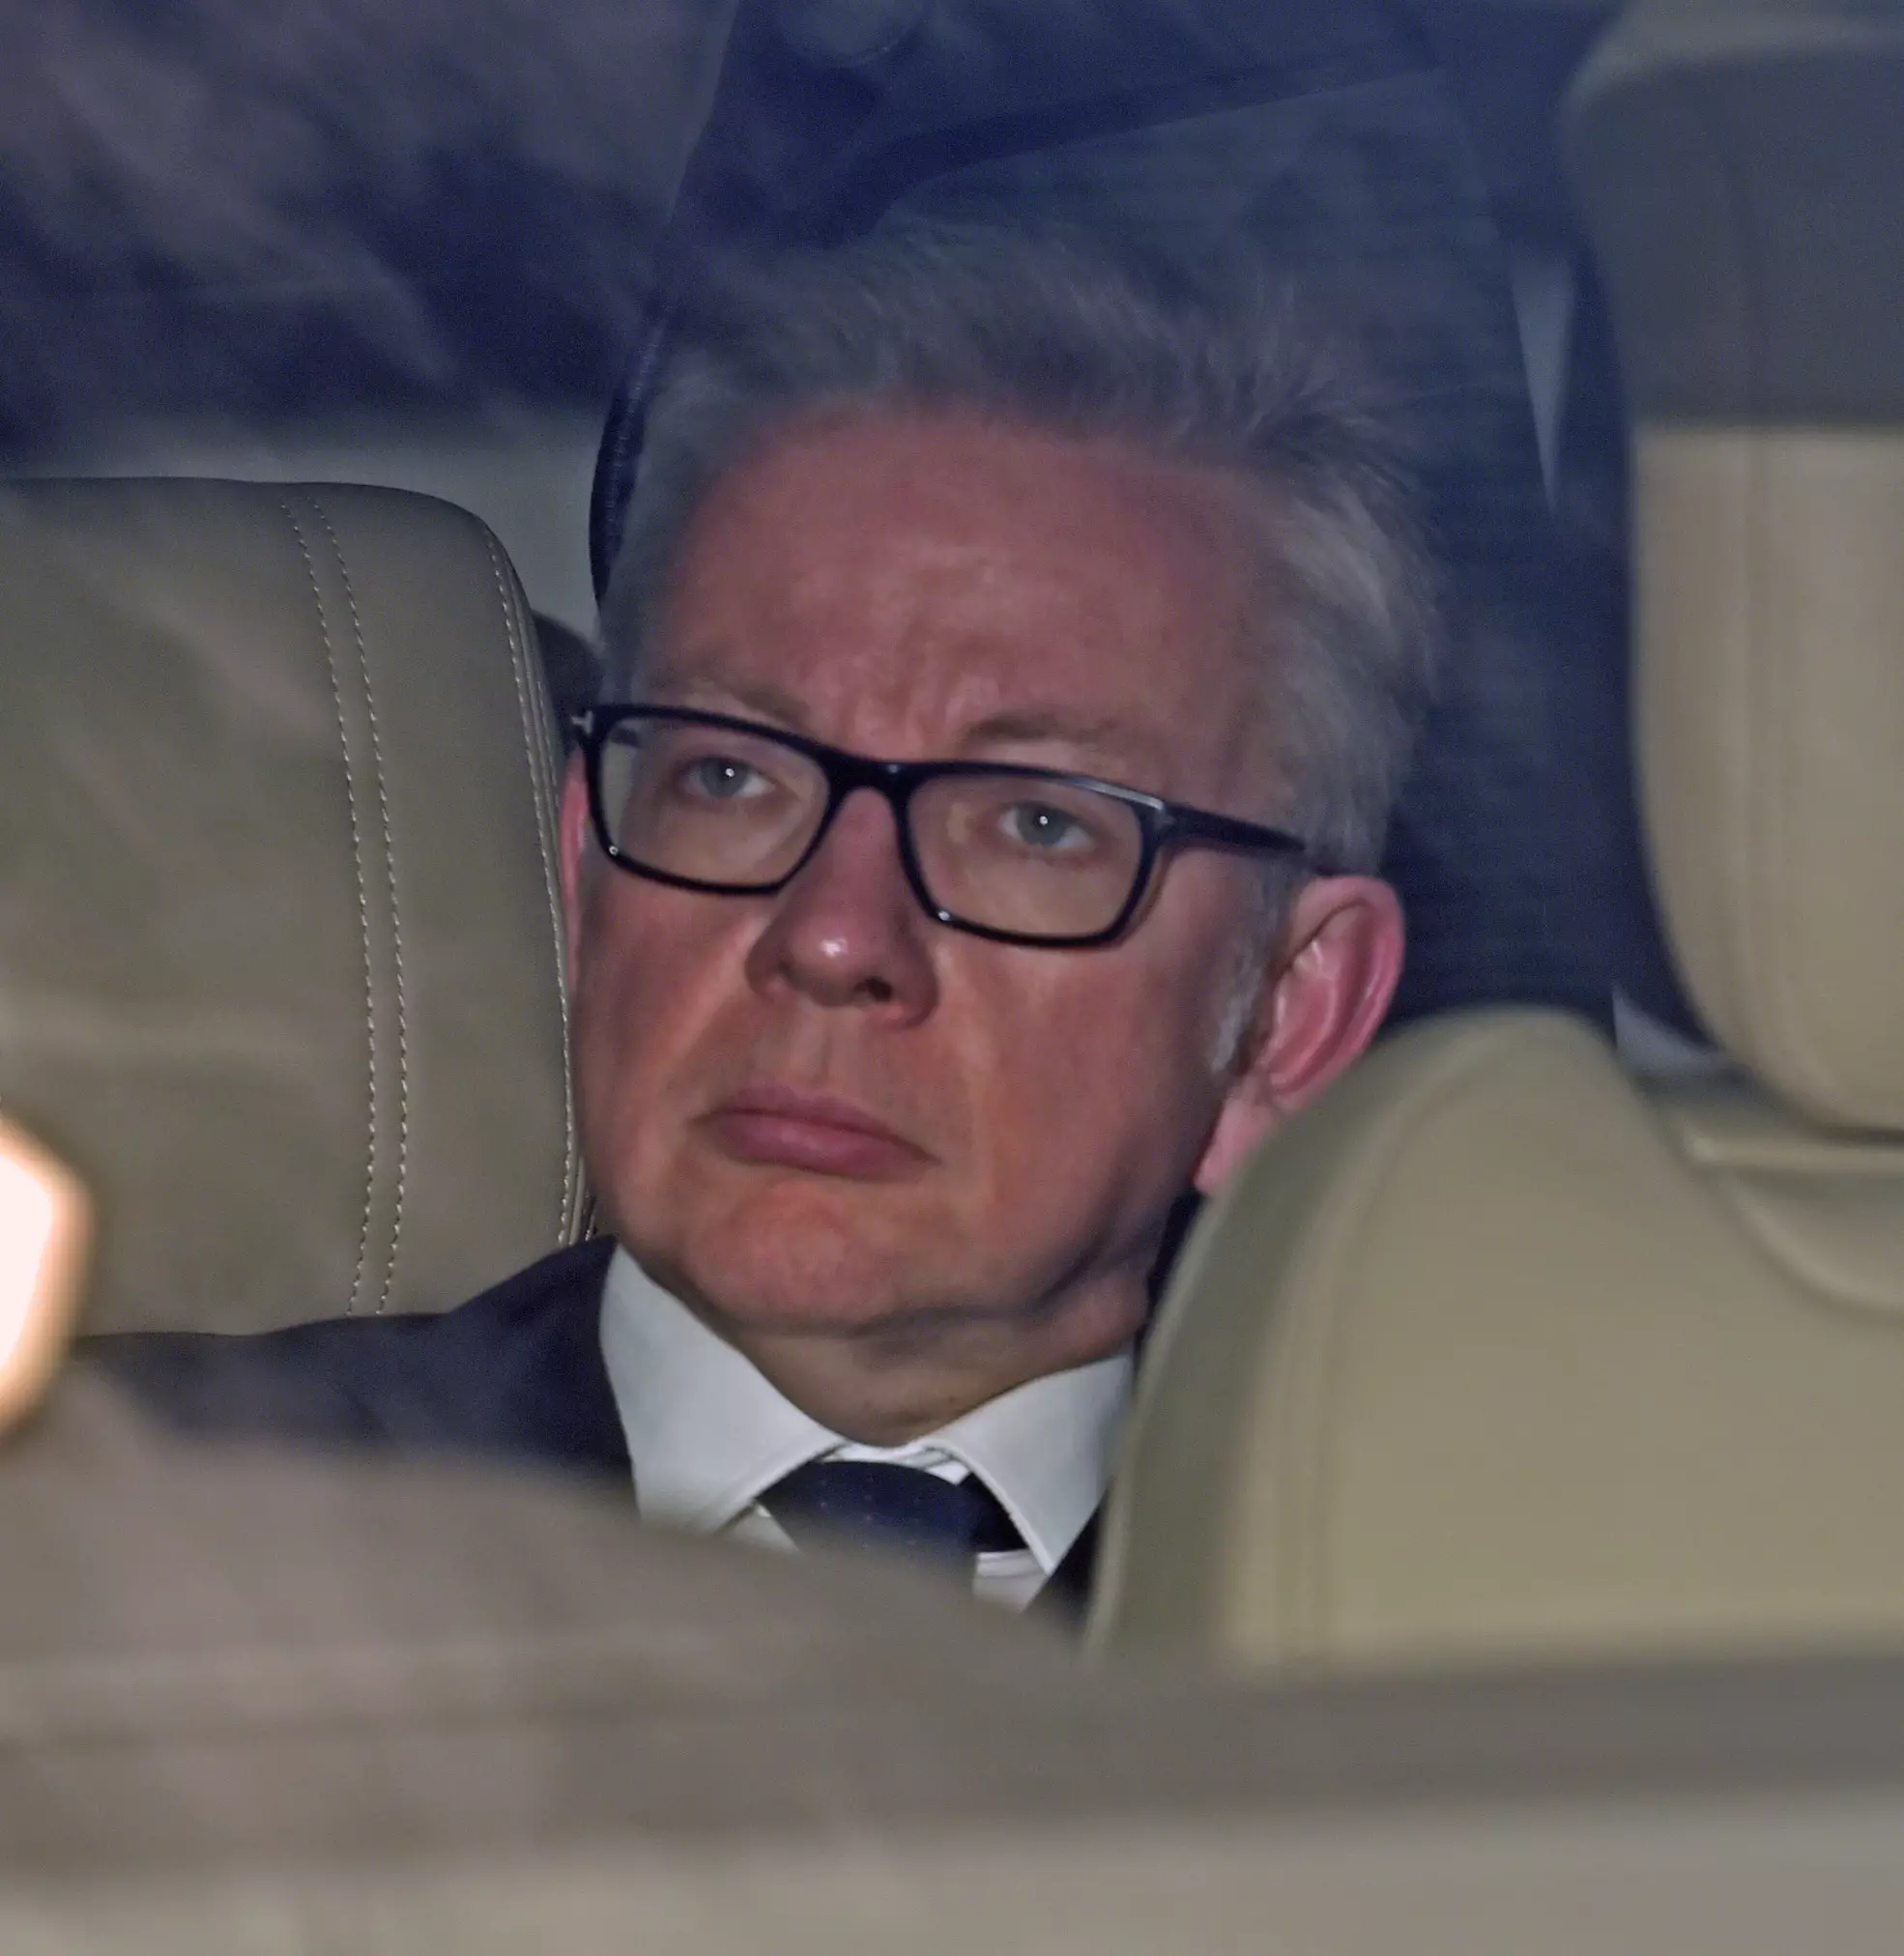 Michael Gove admitted to taking the Class A drug in the past.